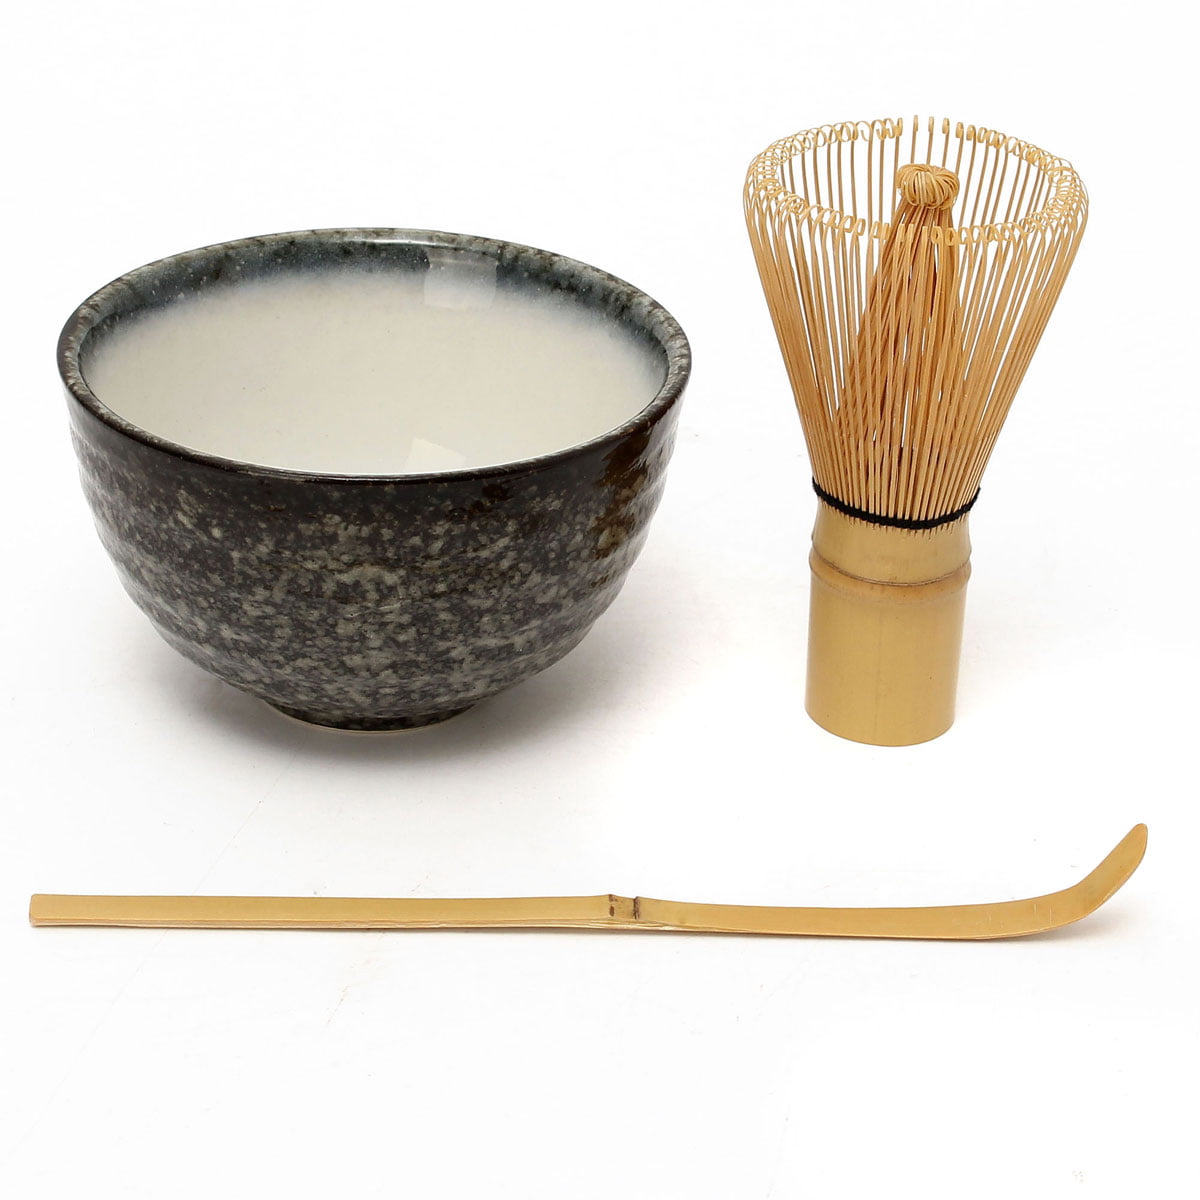 Japanese Ume Flower Matcha Cup Bowl w/ Bamboo Scoop & 100 Whisk Tea Ceremony Set 